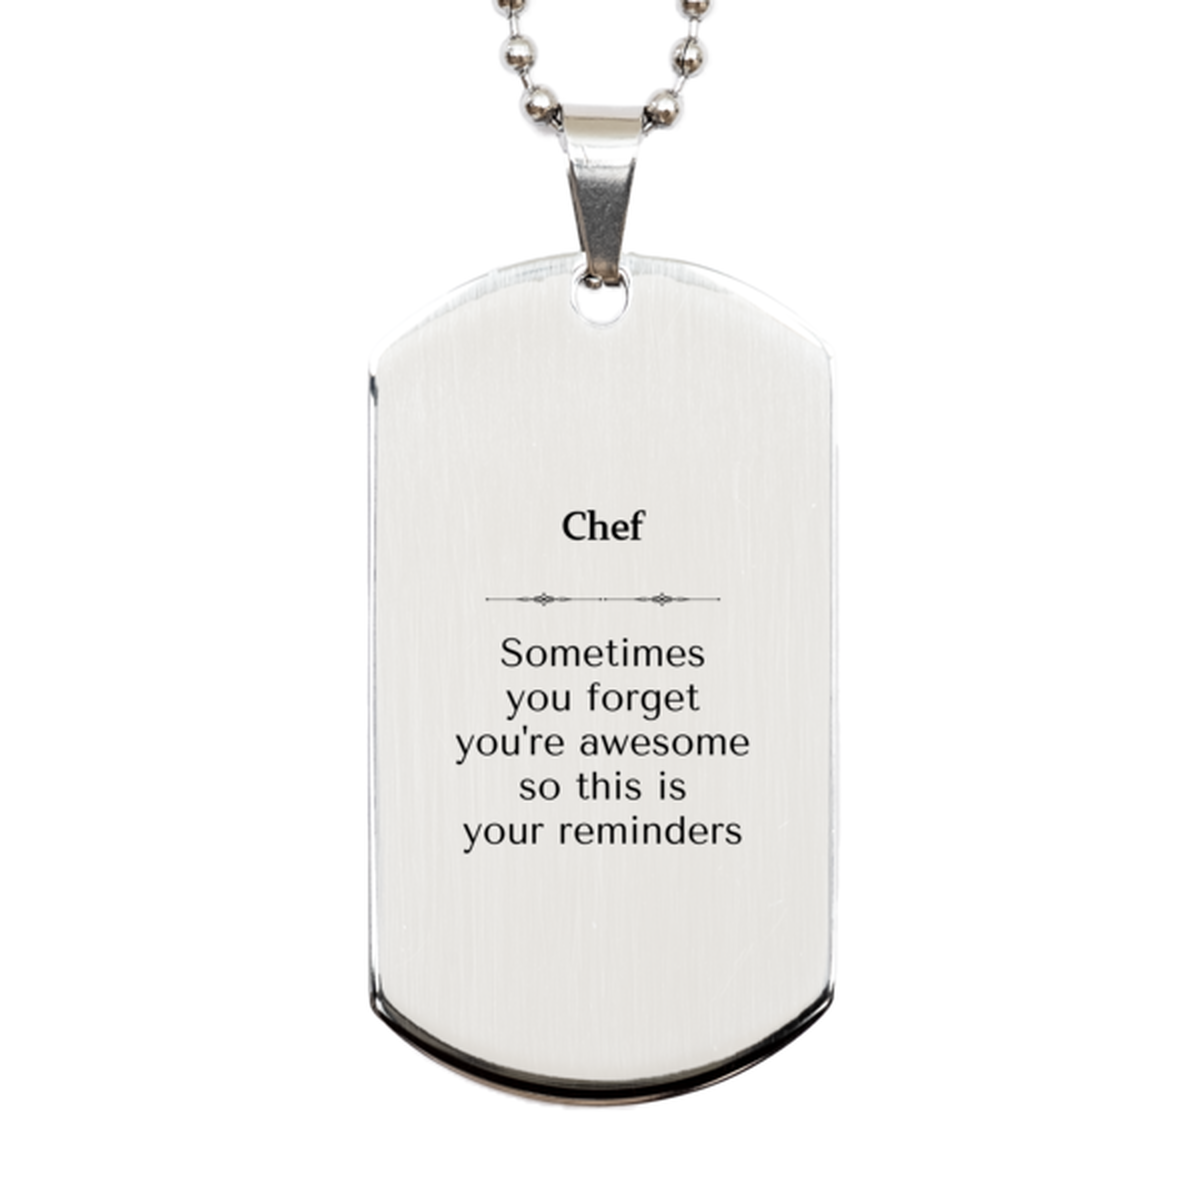 Sentimental Chef Silver Dog Tag, Chef Sometimes you forget you're awesome so this is your reminders, Graduation Christmas Birthday Gifts for Chef, Men, Women, Coworkers